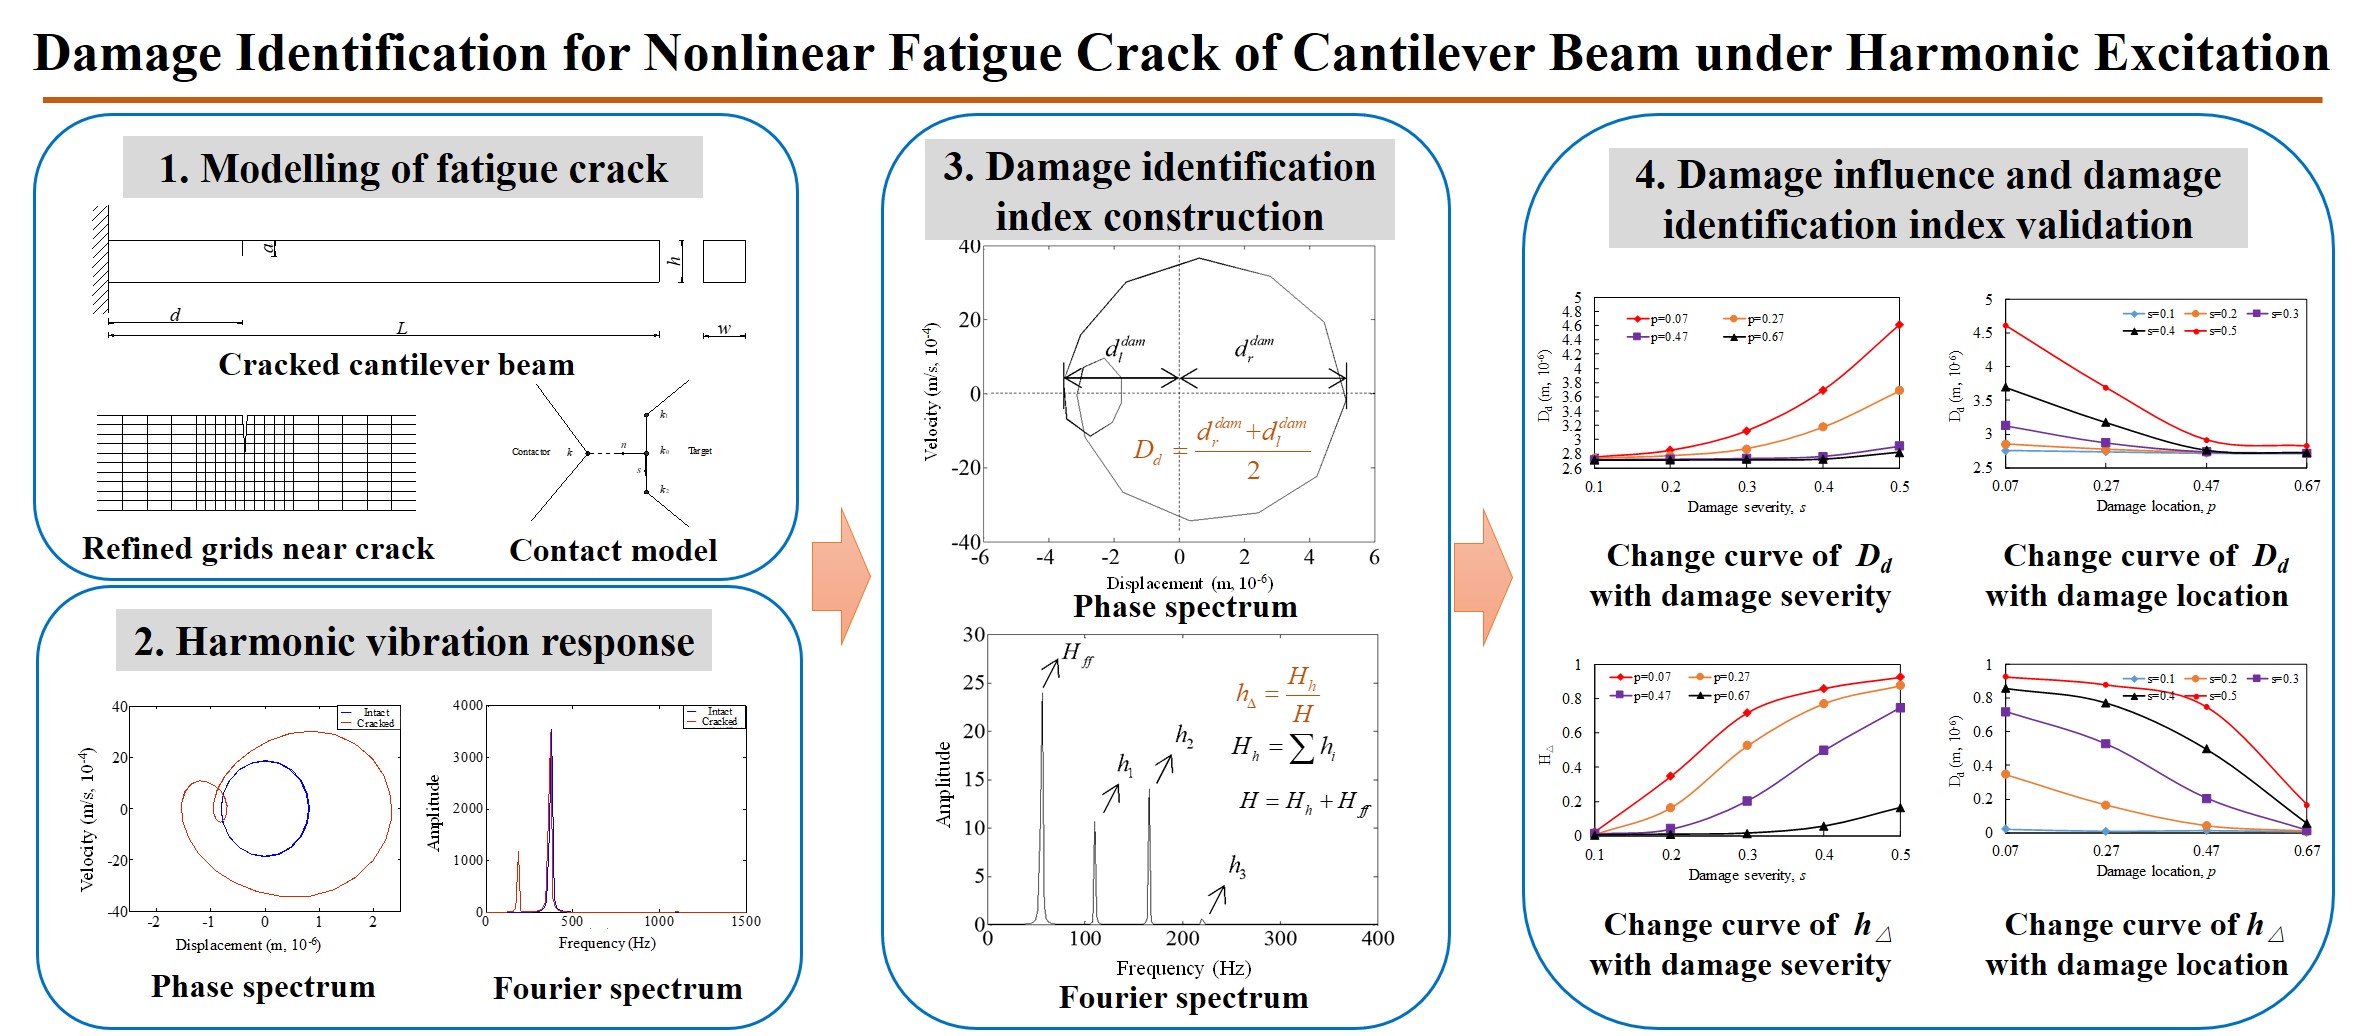 Damage identification for nonlinear fatigue crack of cantilever beam under harmonic excitation